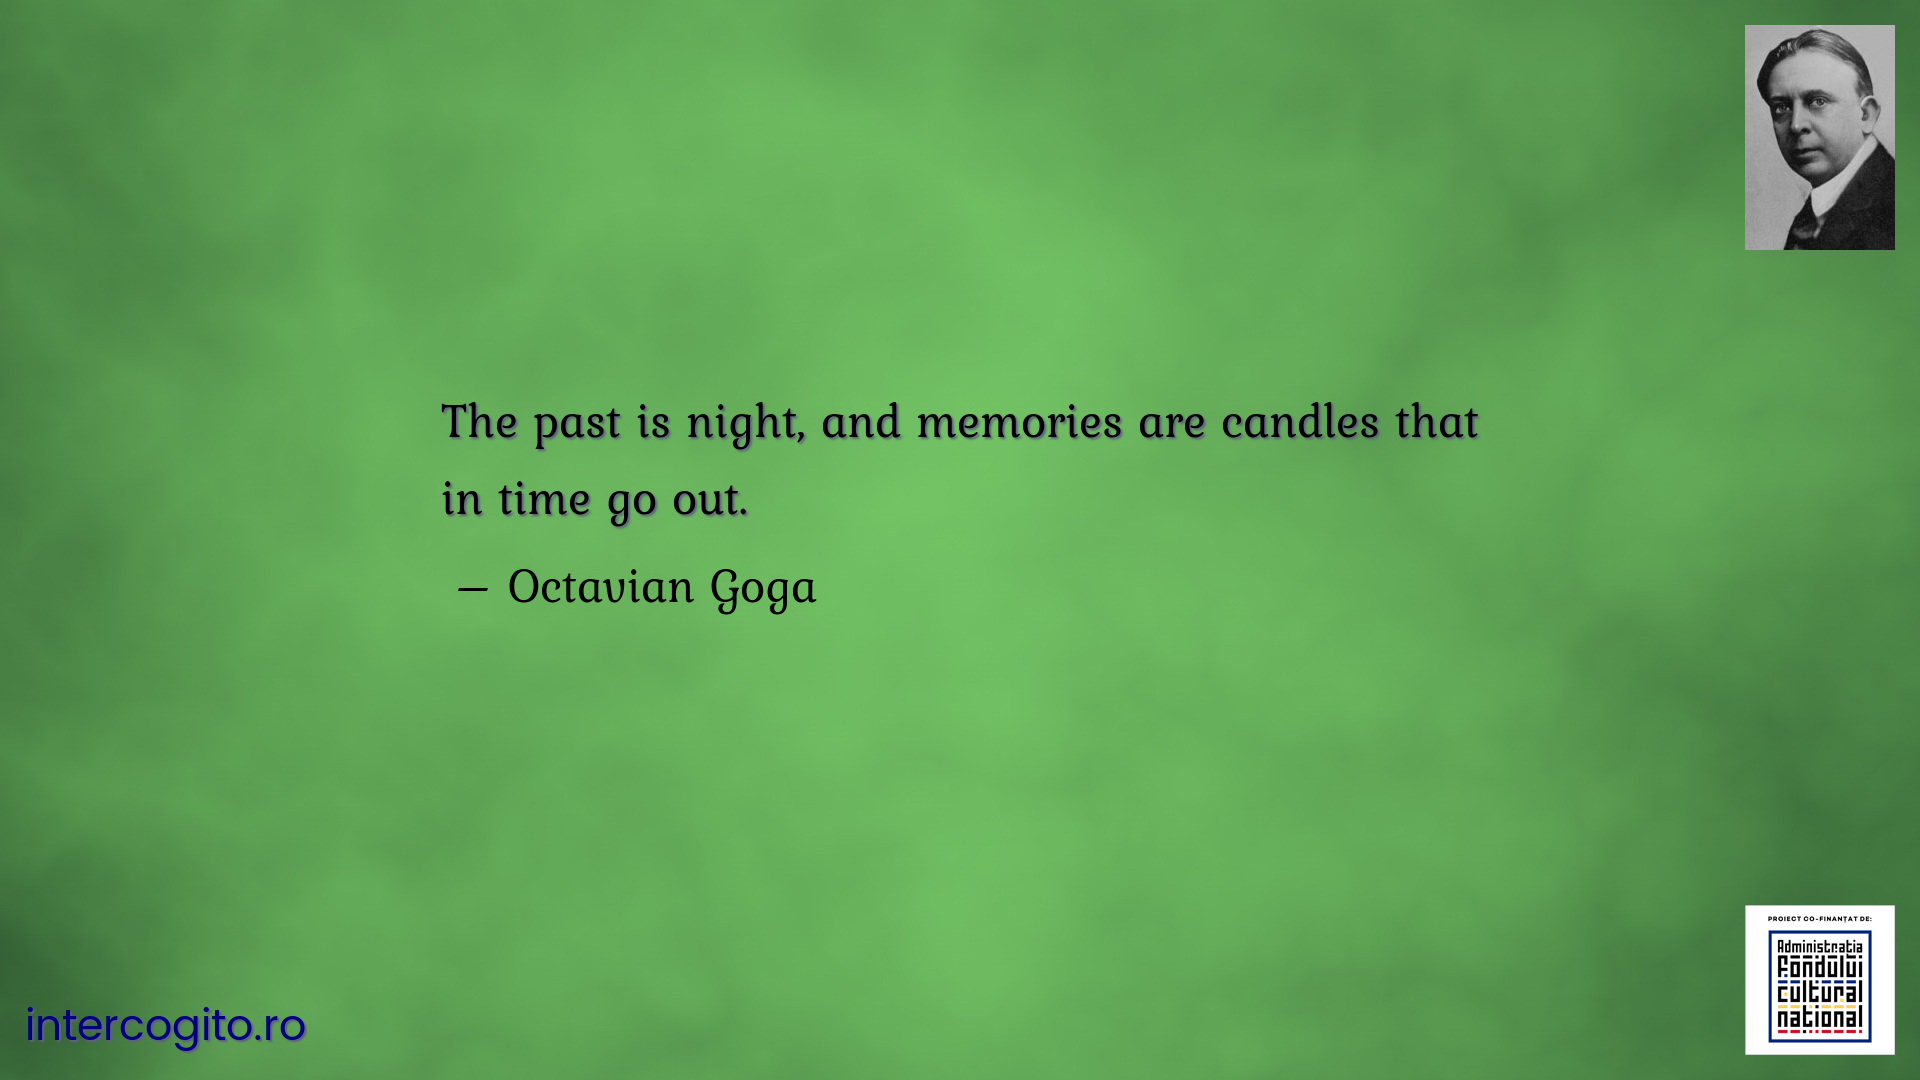 The past is night, and memories are candles that in time go out.